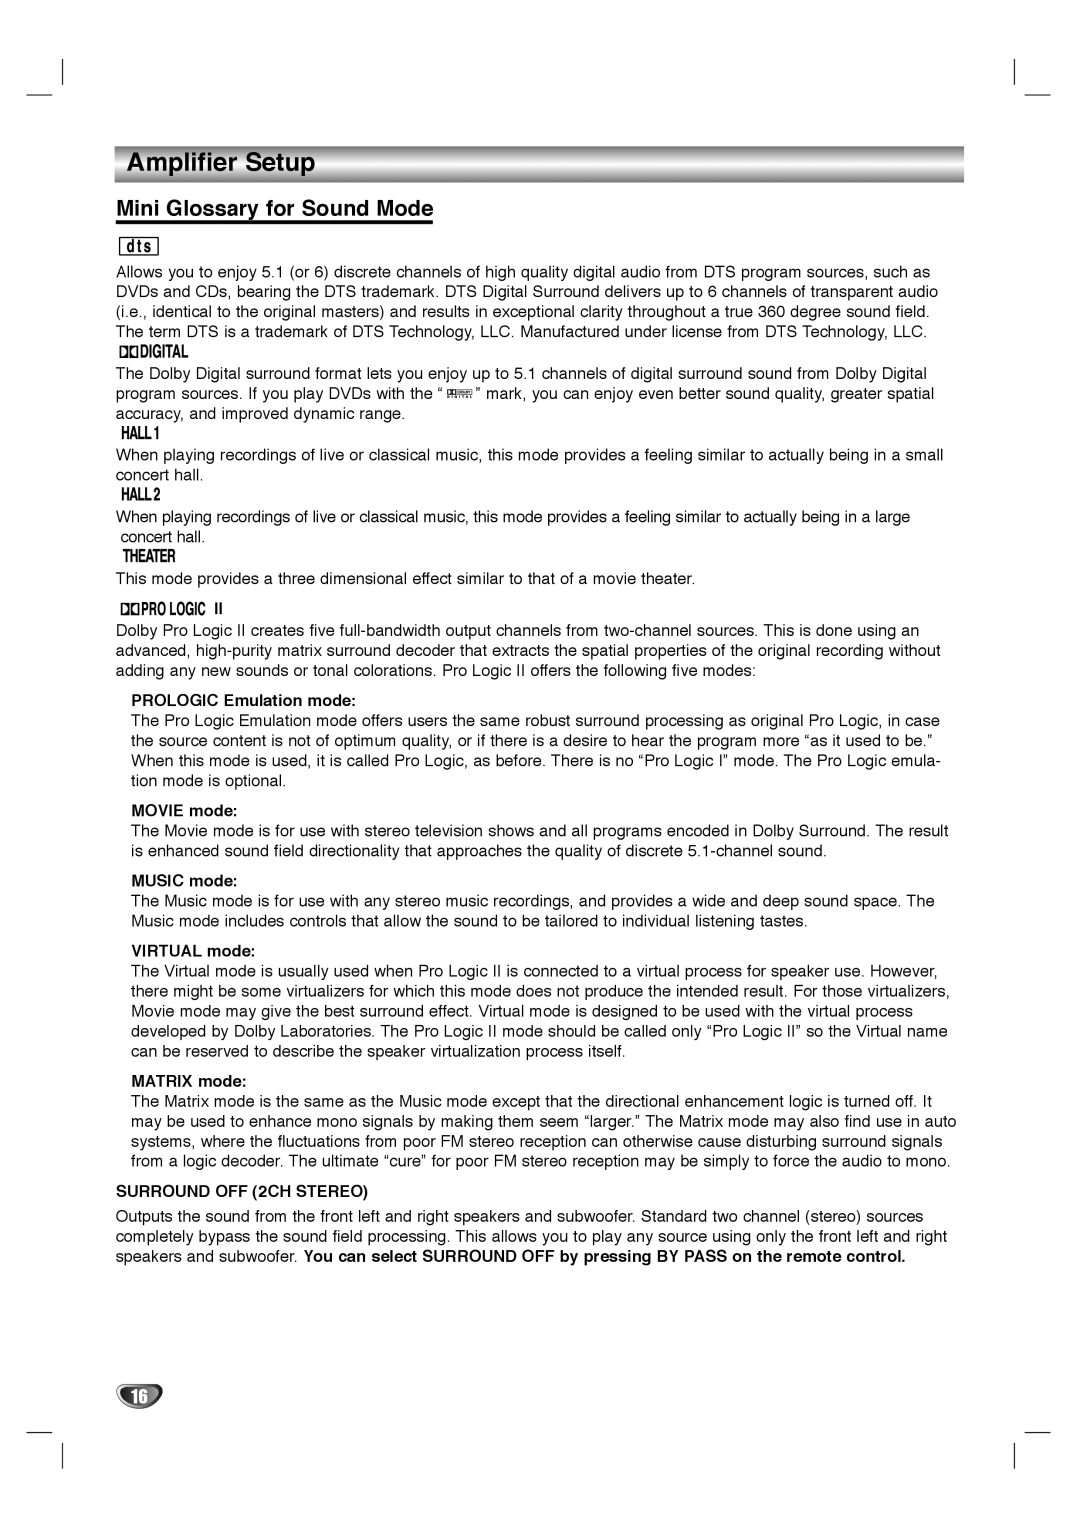 Dolby Laboratories HT2030 manual Amplifier Setup, Mini Glossary for Sound Mode 